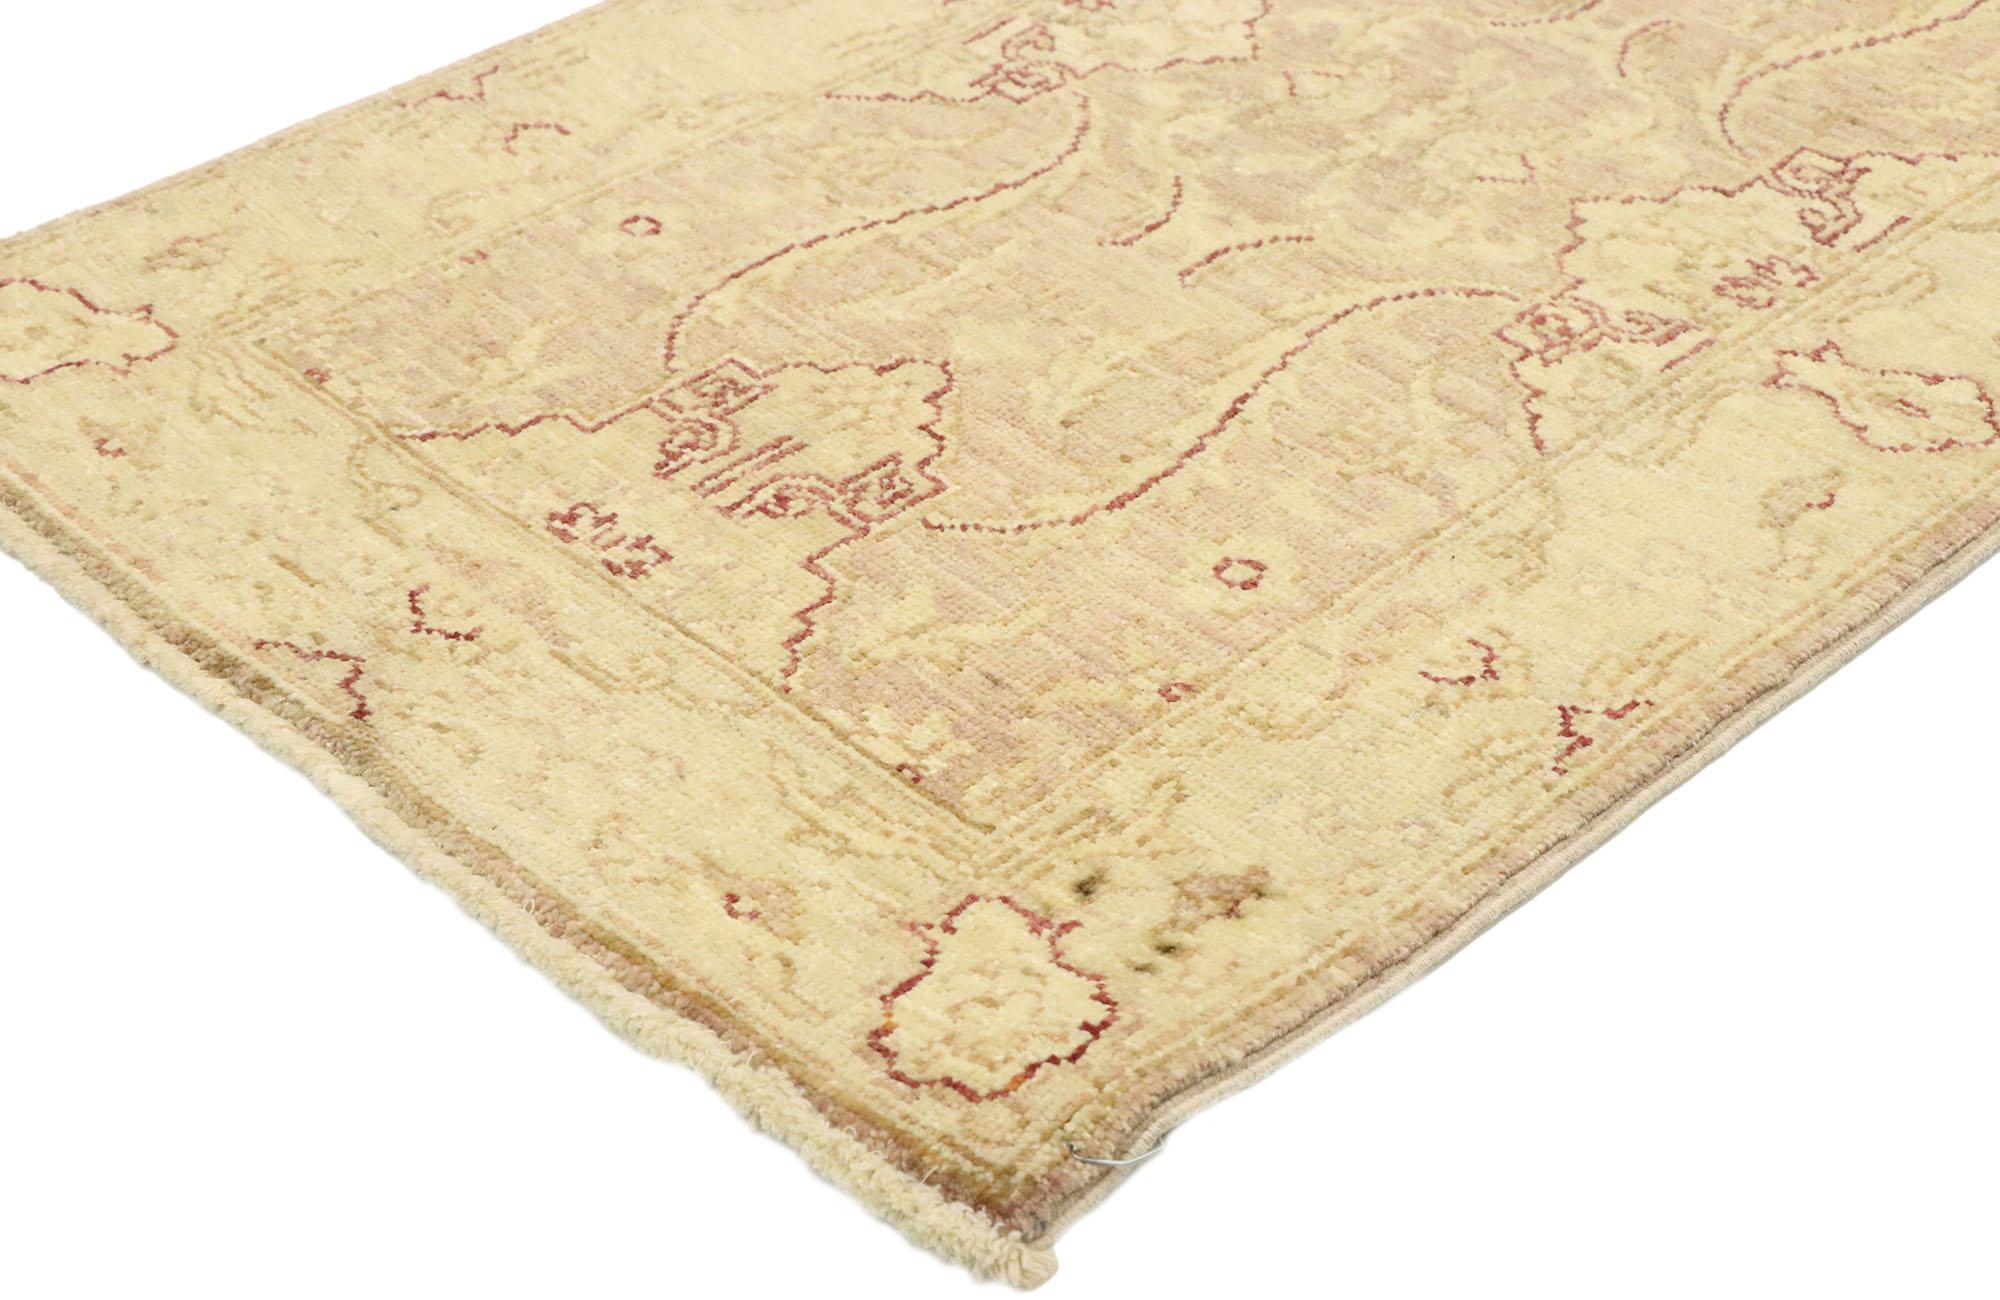 80227 New Transitional Style Runner with Oushak Design, Small Hallway Runner 01'11 x 05'08. This hand-knotted wool Oushak style runner with transitional style features a center amulet and two half amulets on each end. The amulets are connected by